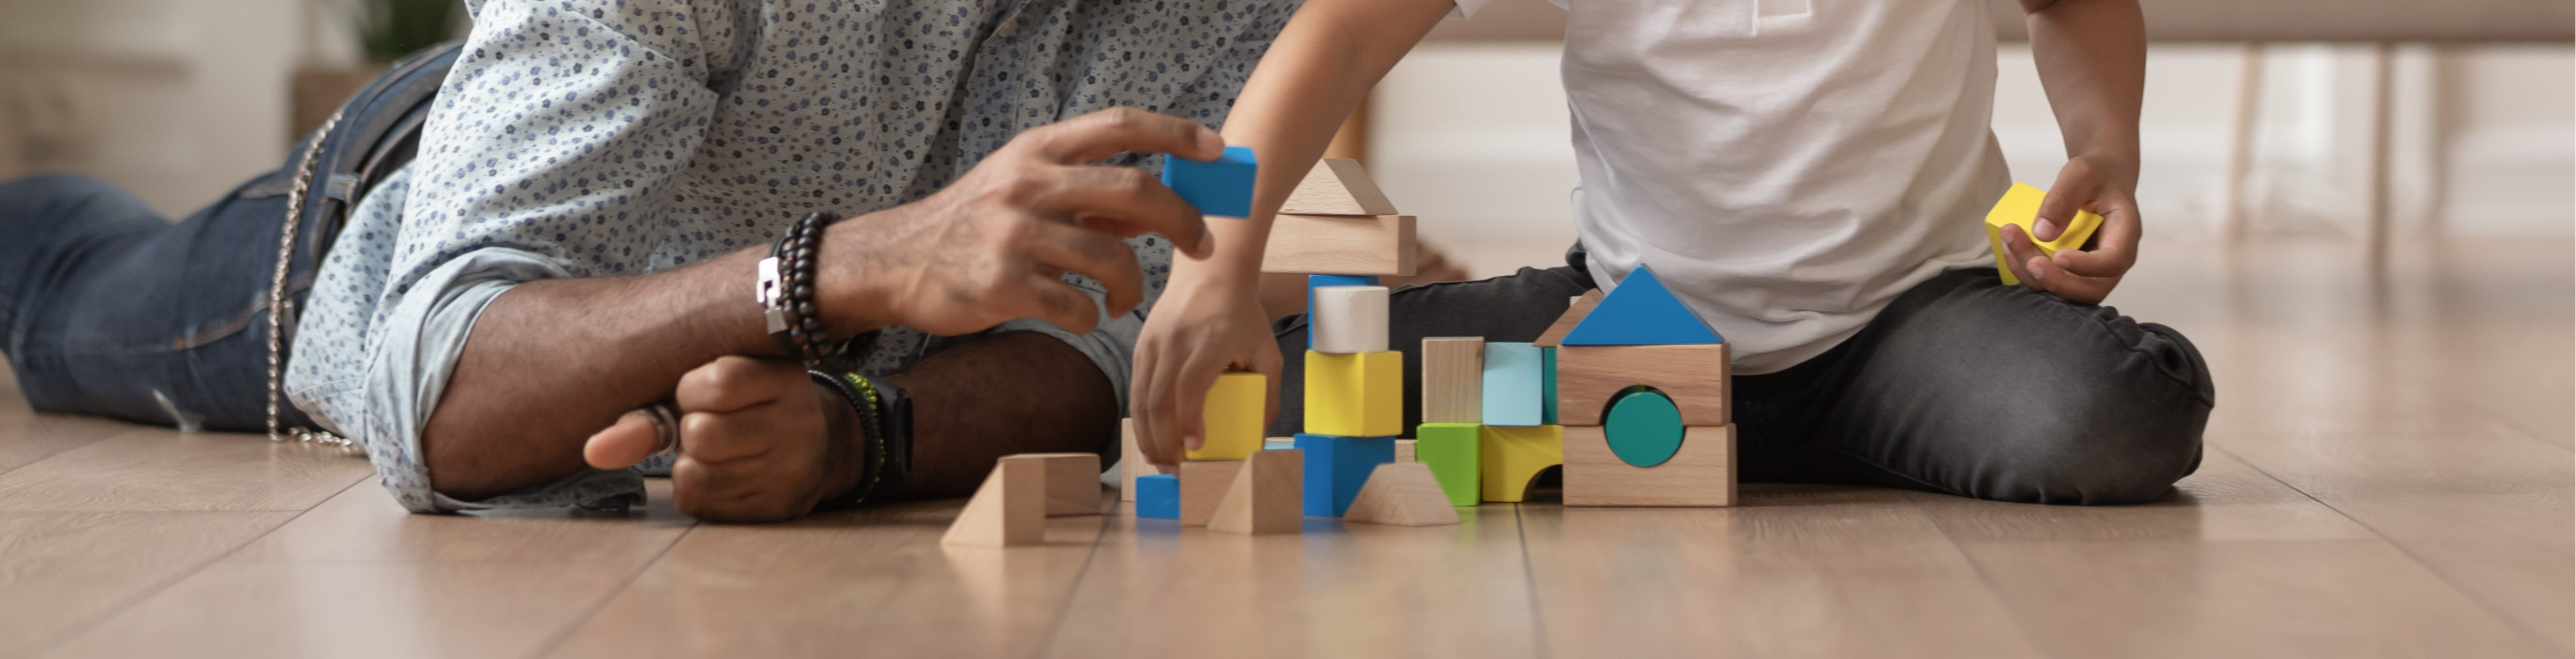 A father playing and arranging blocks with a child.